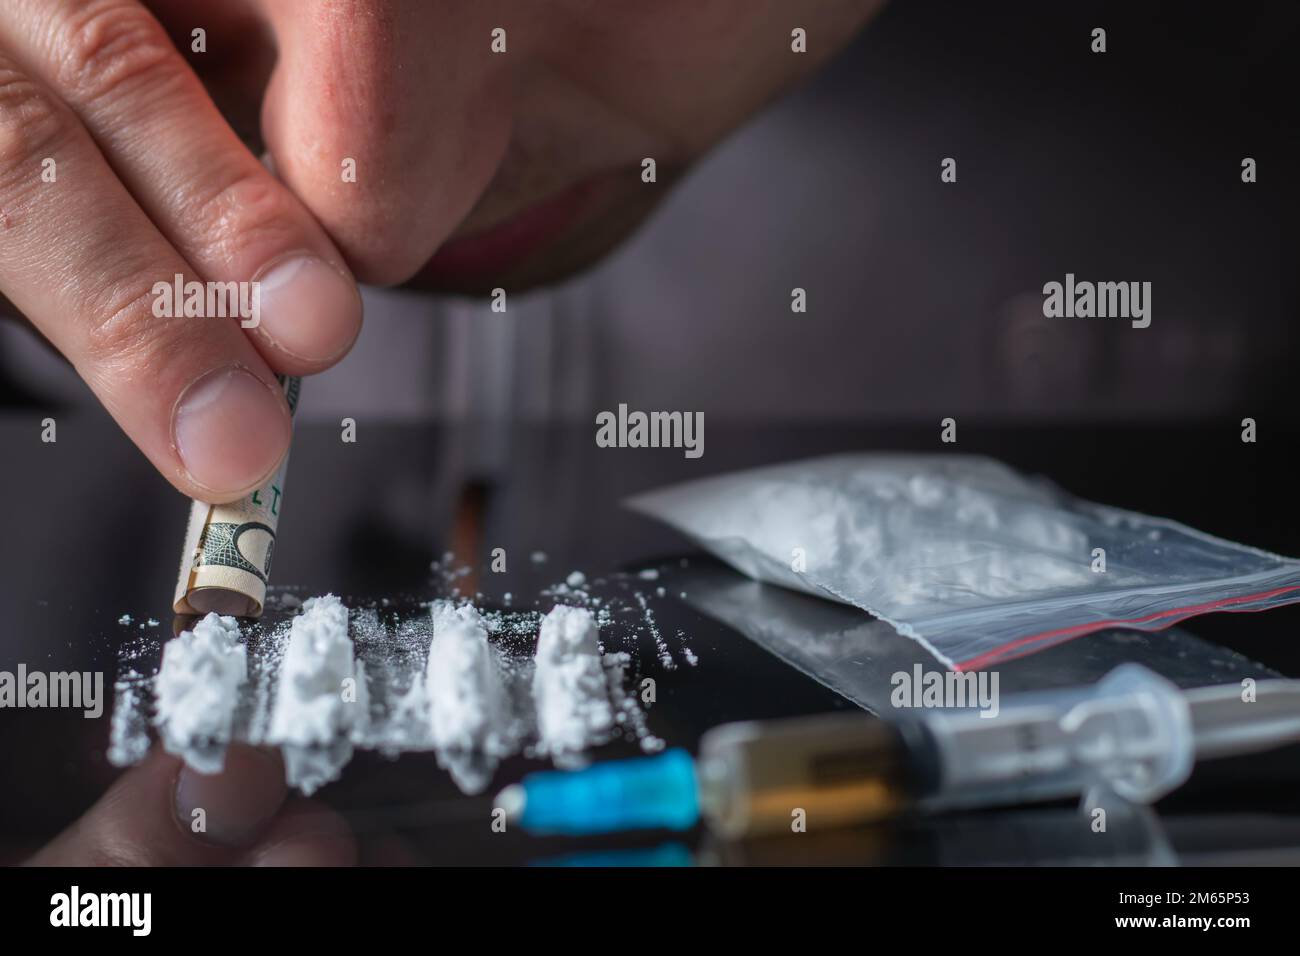 Concept drug addiction.. Drug abuse, man taking drugs, snorting lines of cocaine powder, close up. Stock Photo